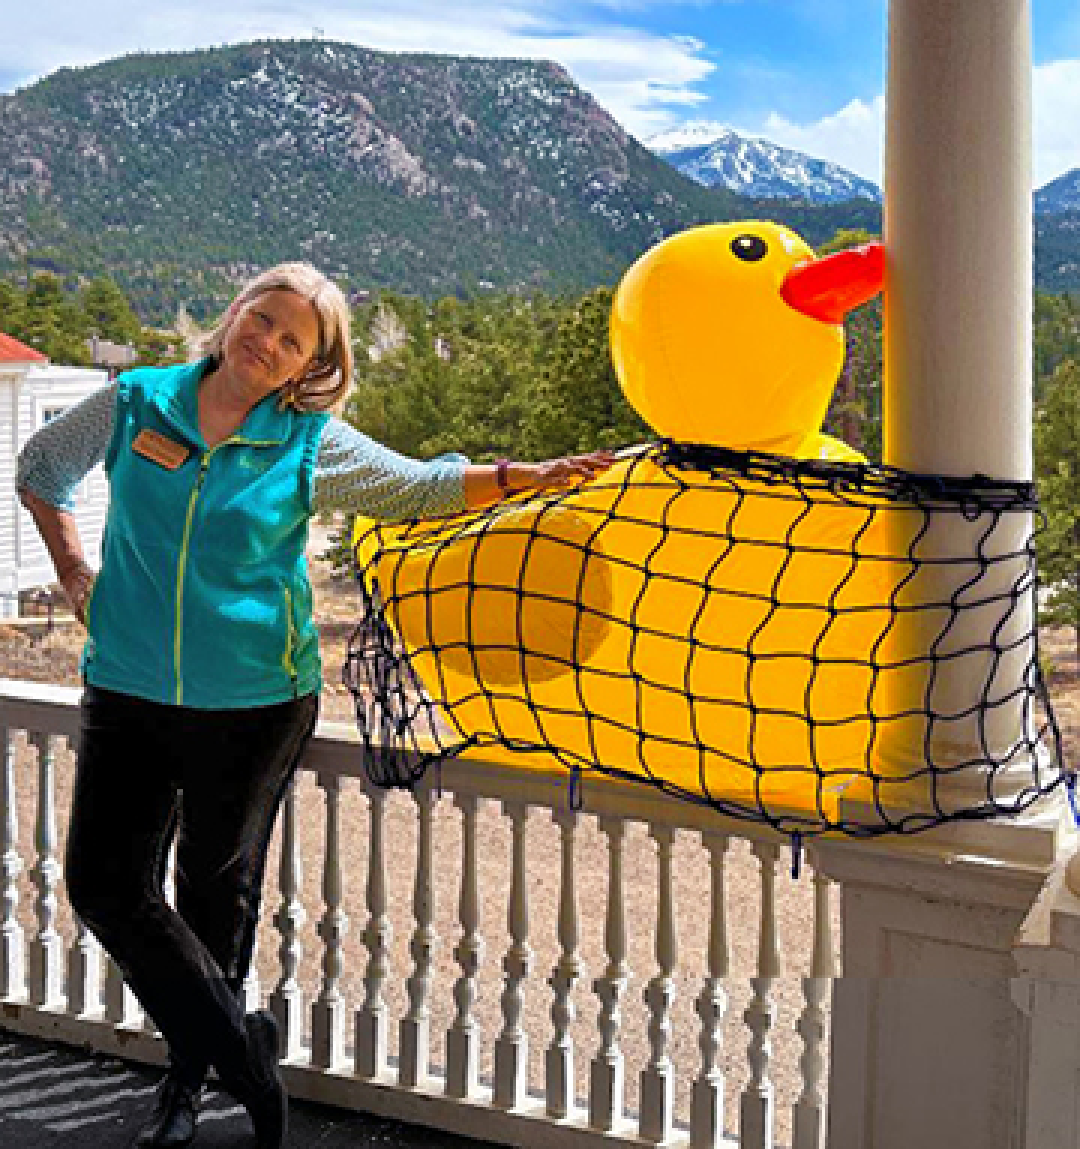 stanley home museum docent standing next to an inflatable duck for the estes park rotary club duck race festival